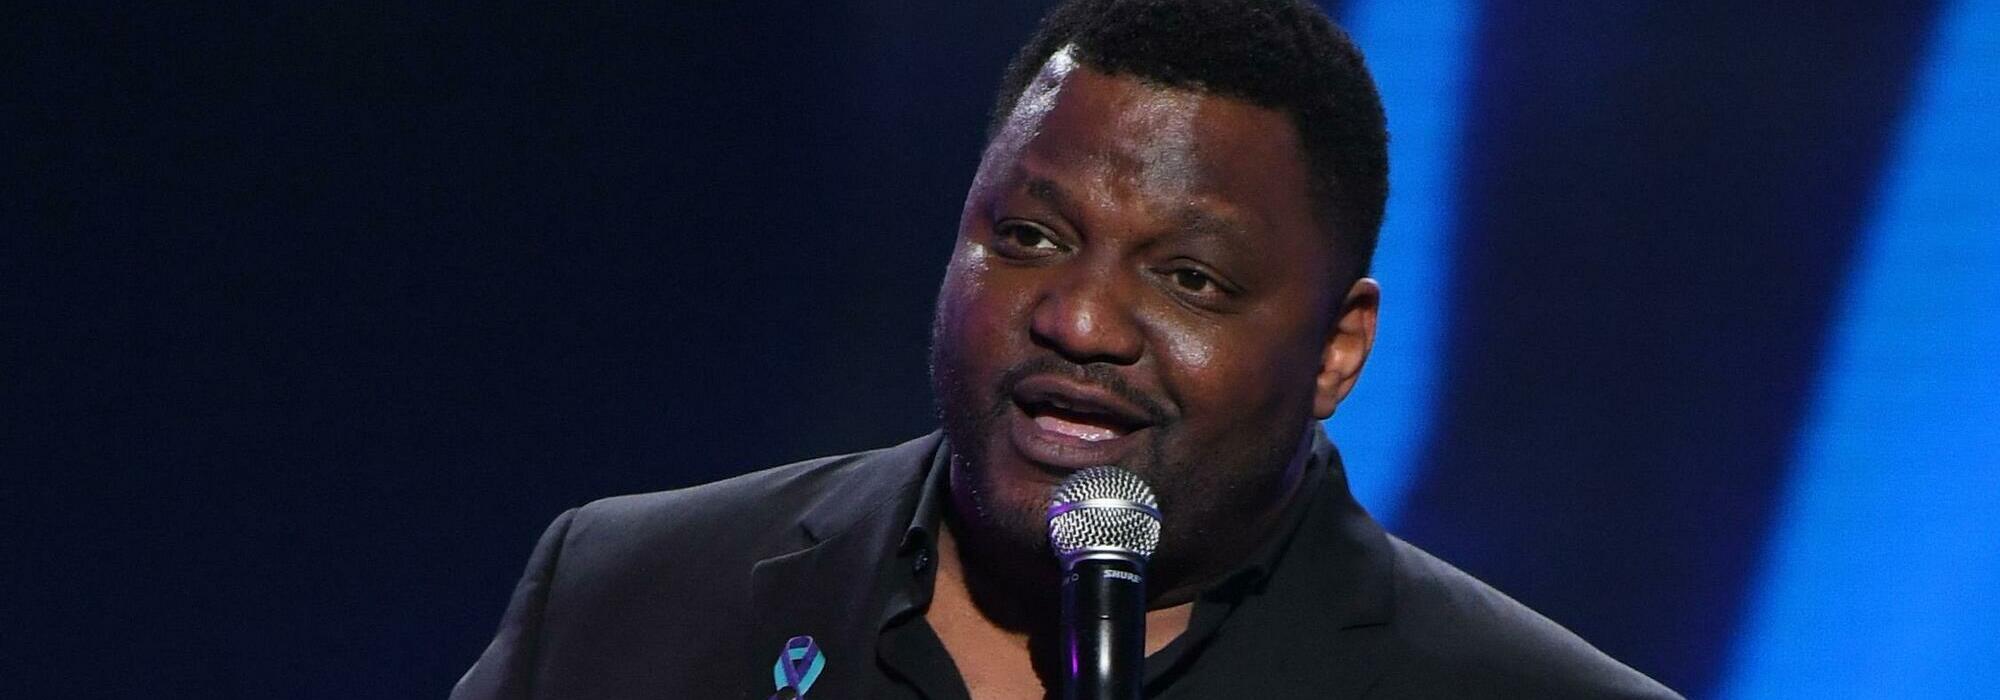 A Aries Spears live event